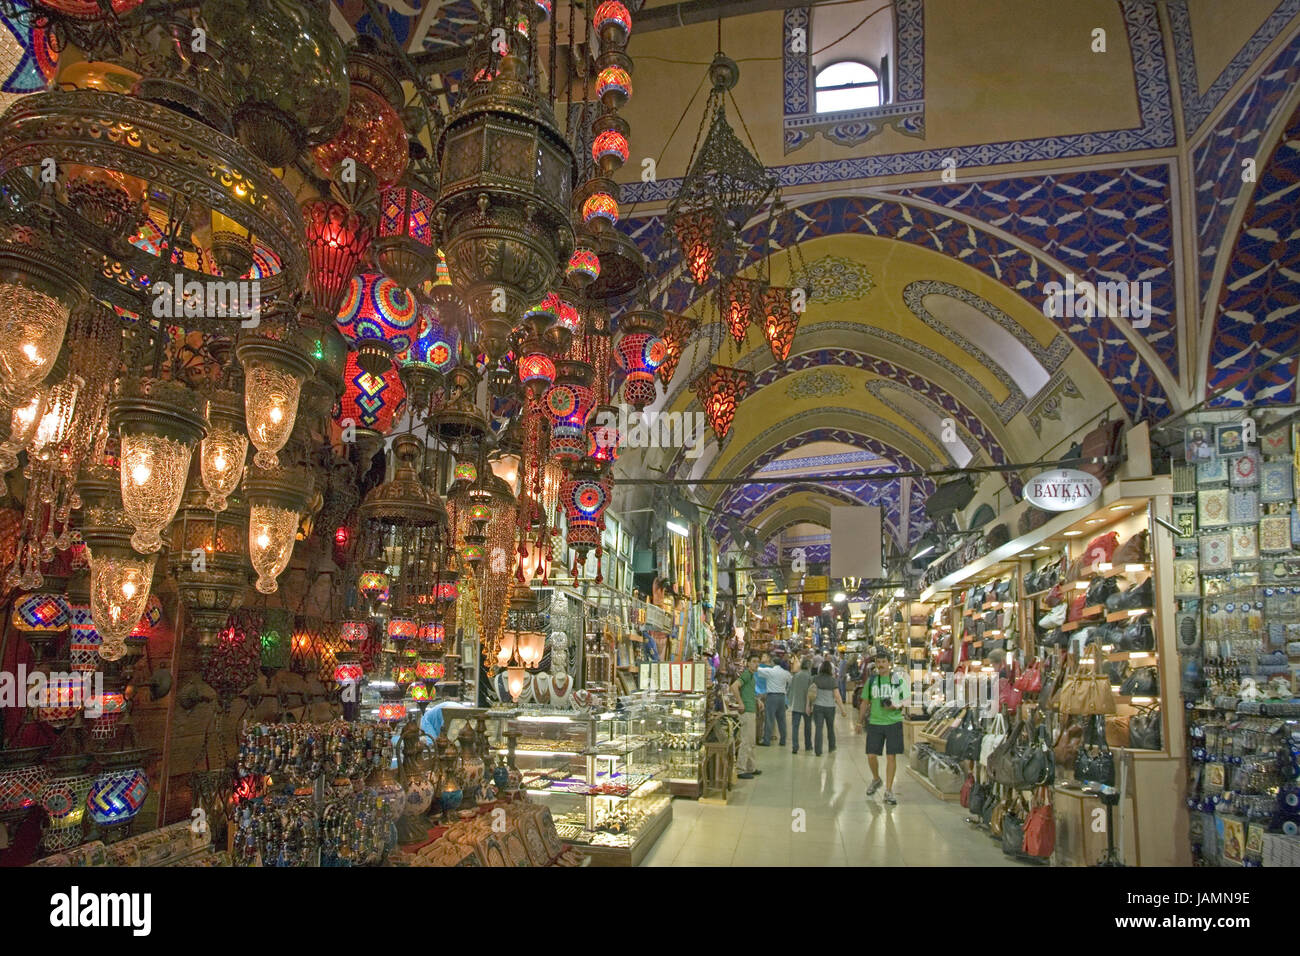 Turkey,Istanbul,Grand Bazaar,sales,lamps,no model release,town,city,metropolis,port,culture,place of interest,building,bazaar,shops,shopping street,market,person,locals,tourists,shopping,architecture,lamp business,differently, Stock Photo